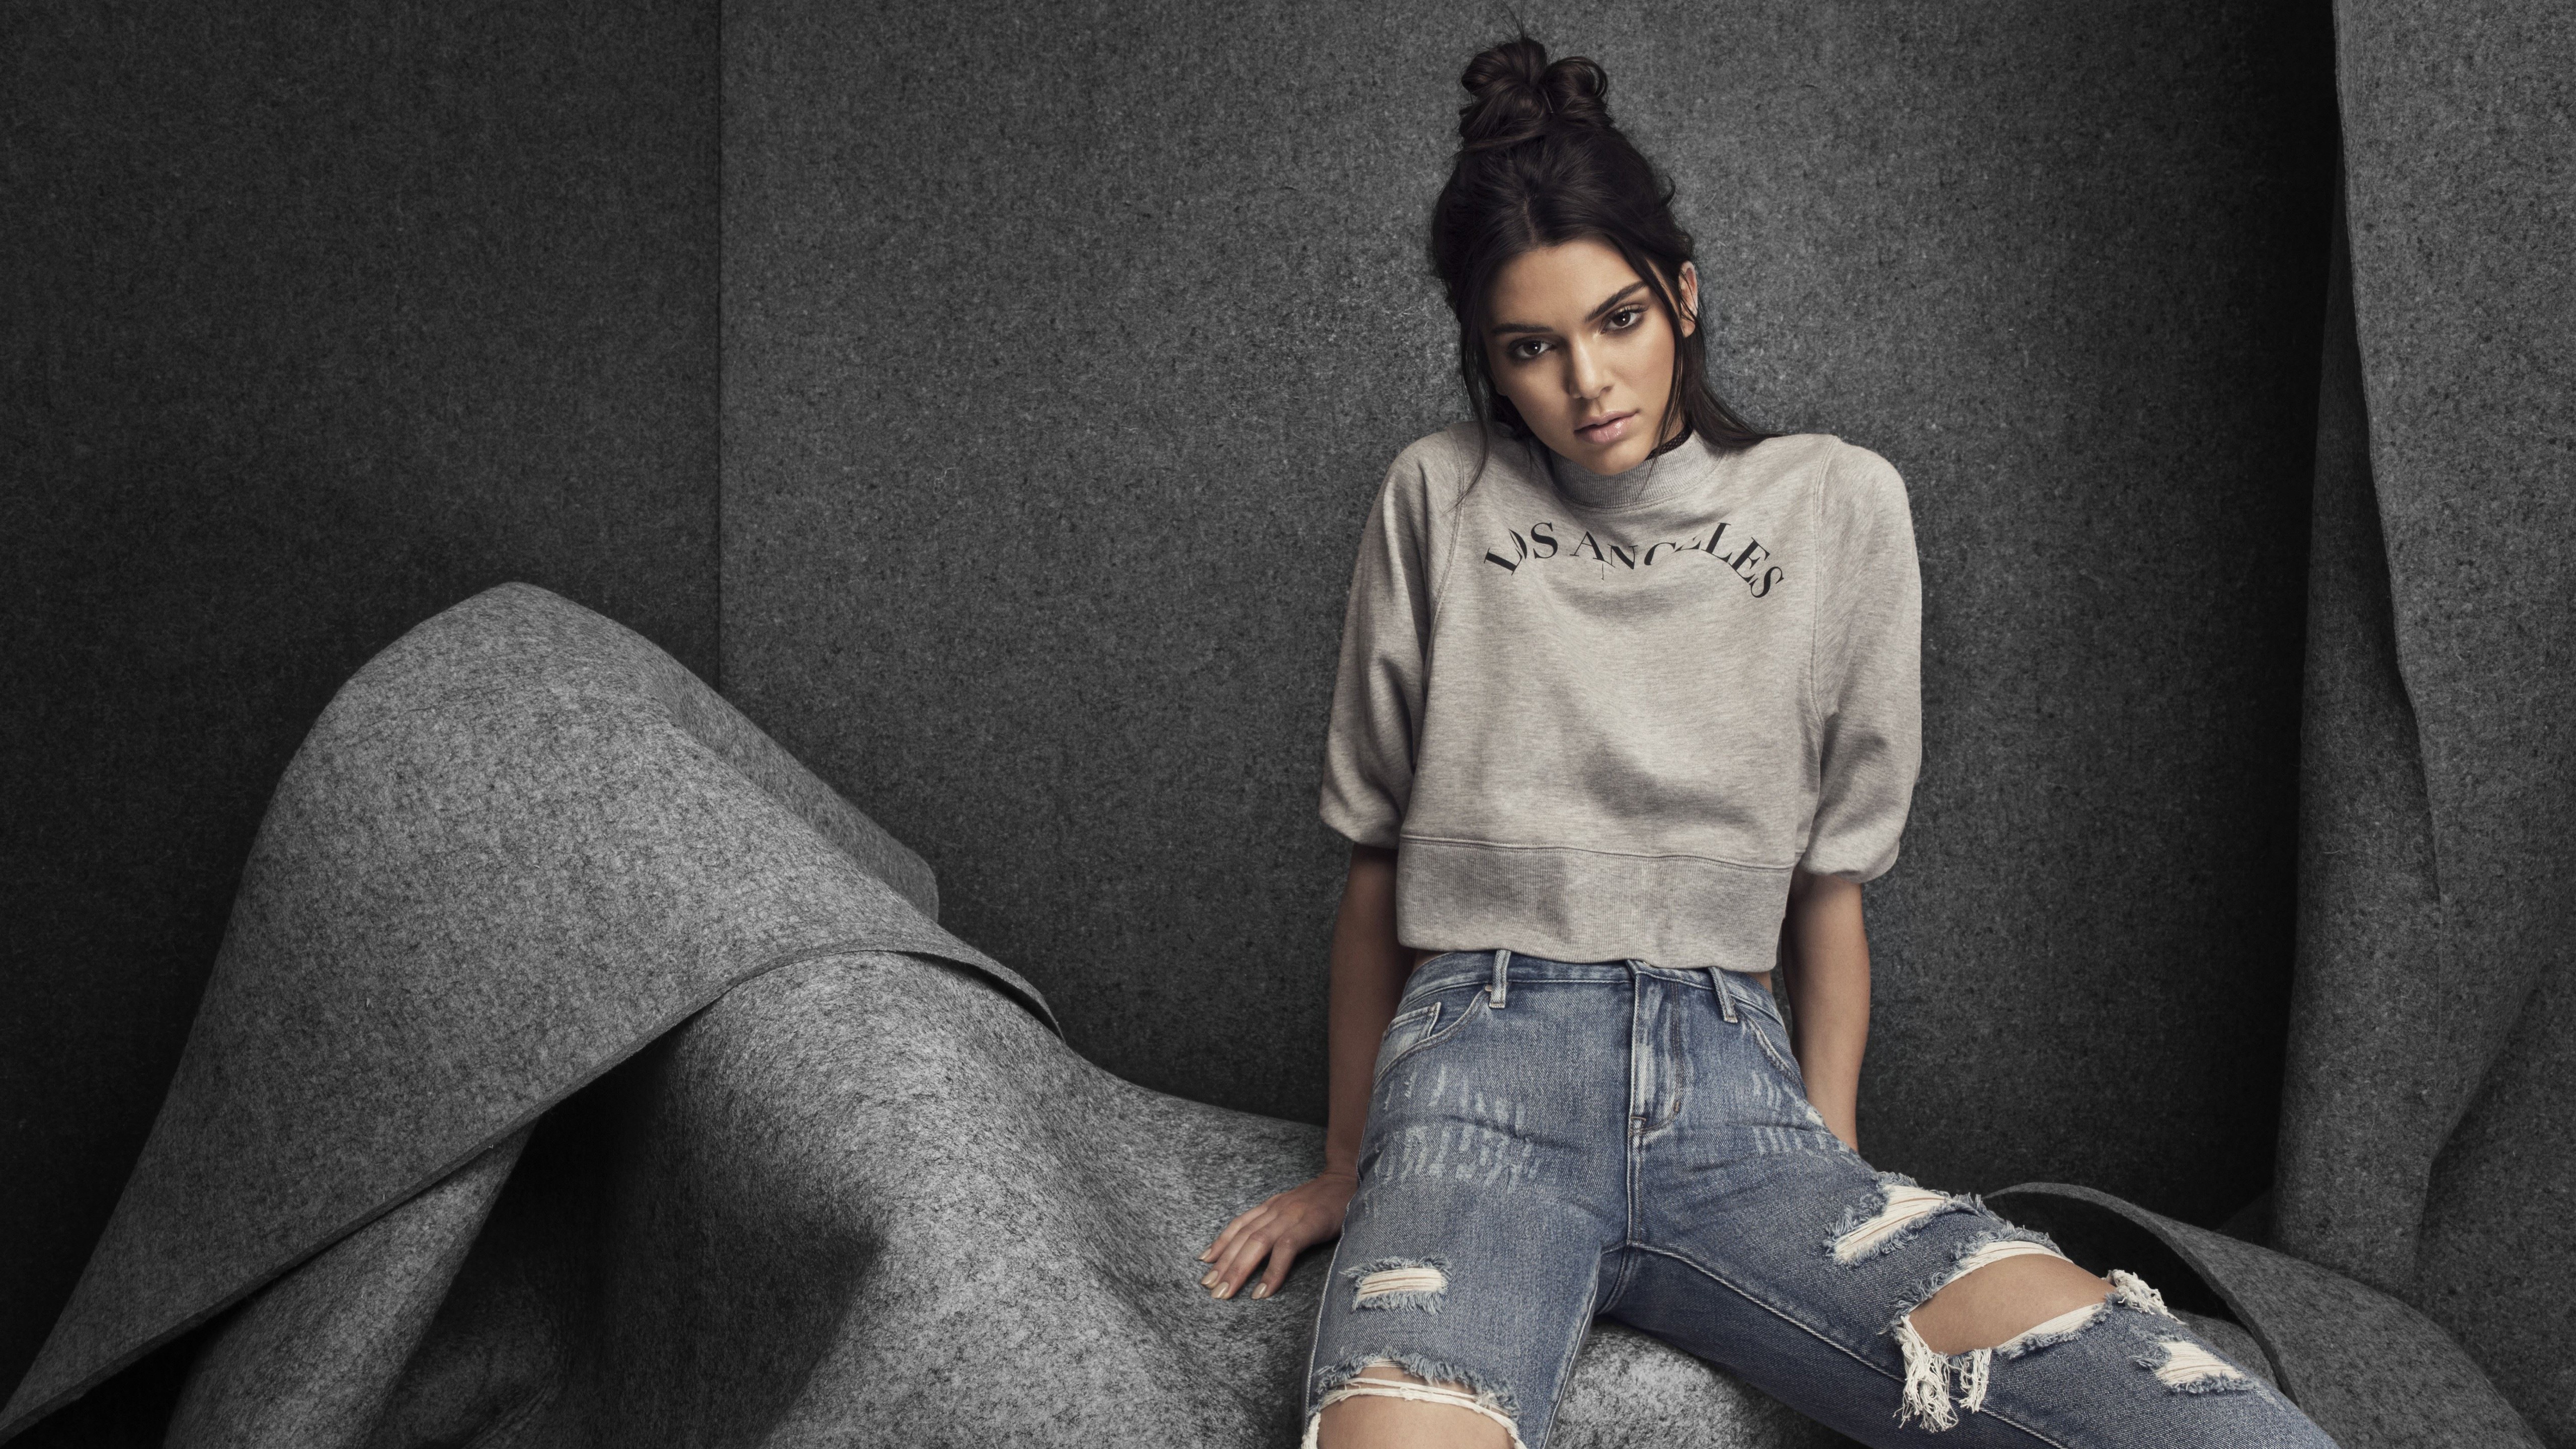 kendall jenner pacsun 5k free awesome image for mobile